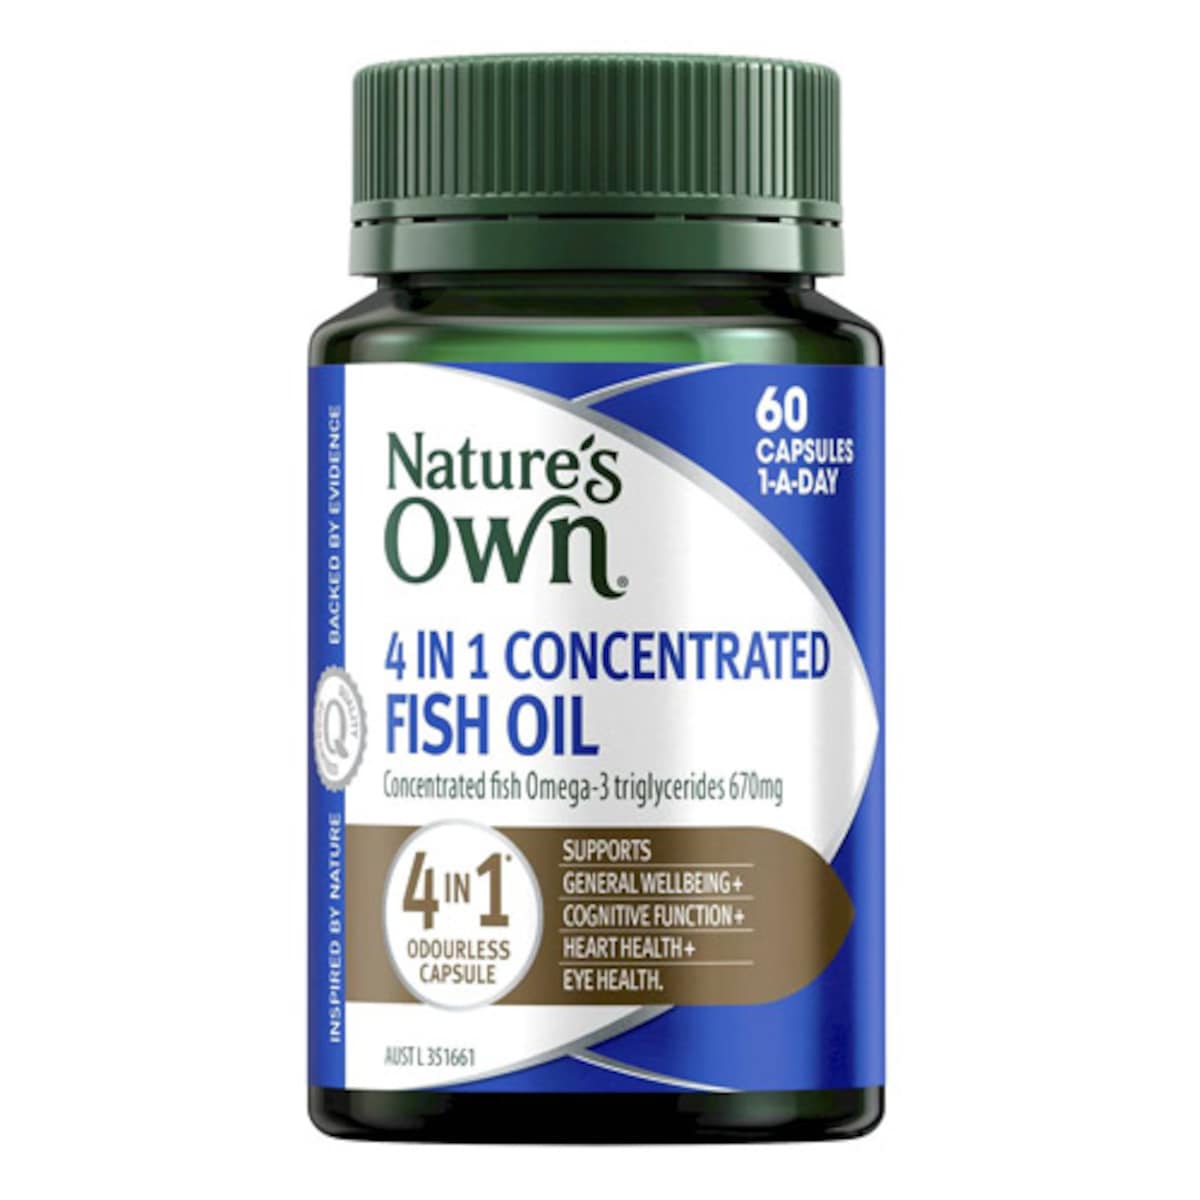 Natures Own 4 In 1 Concentrated Fish Oil 60 Capsules